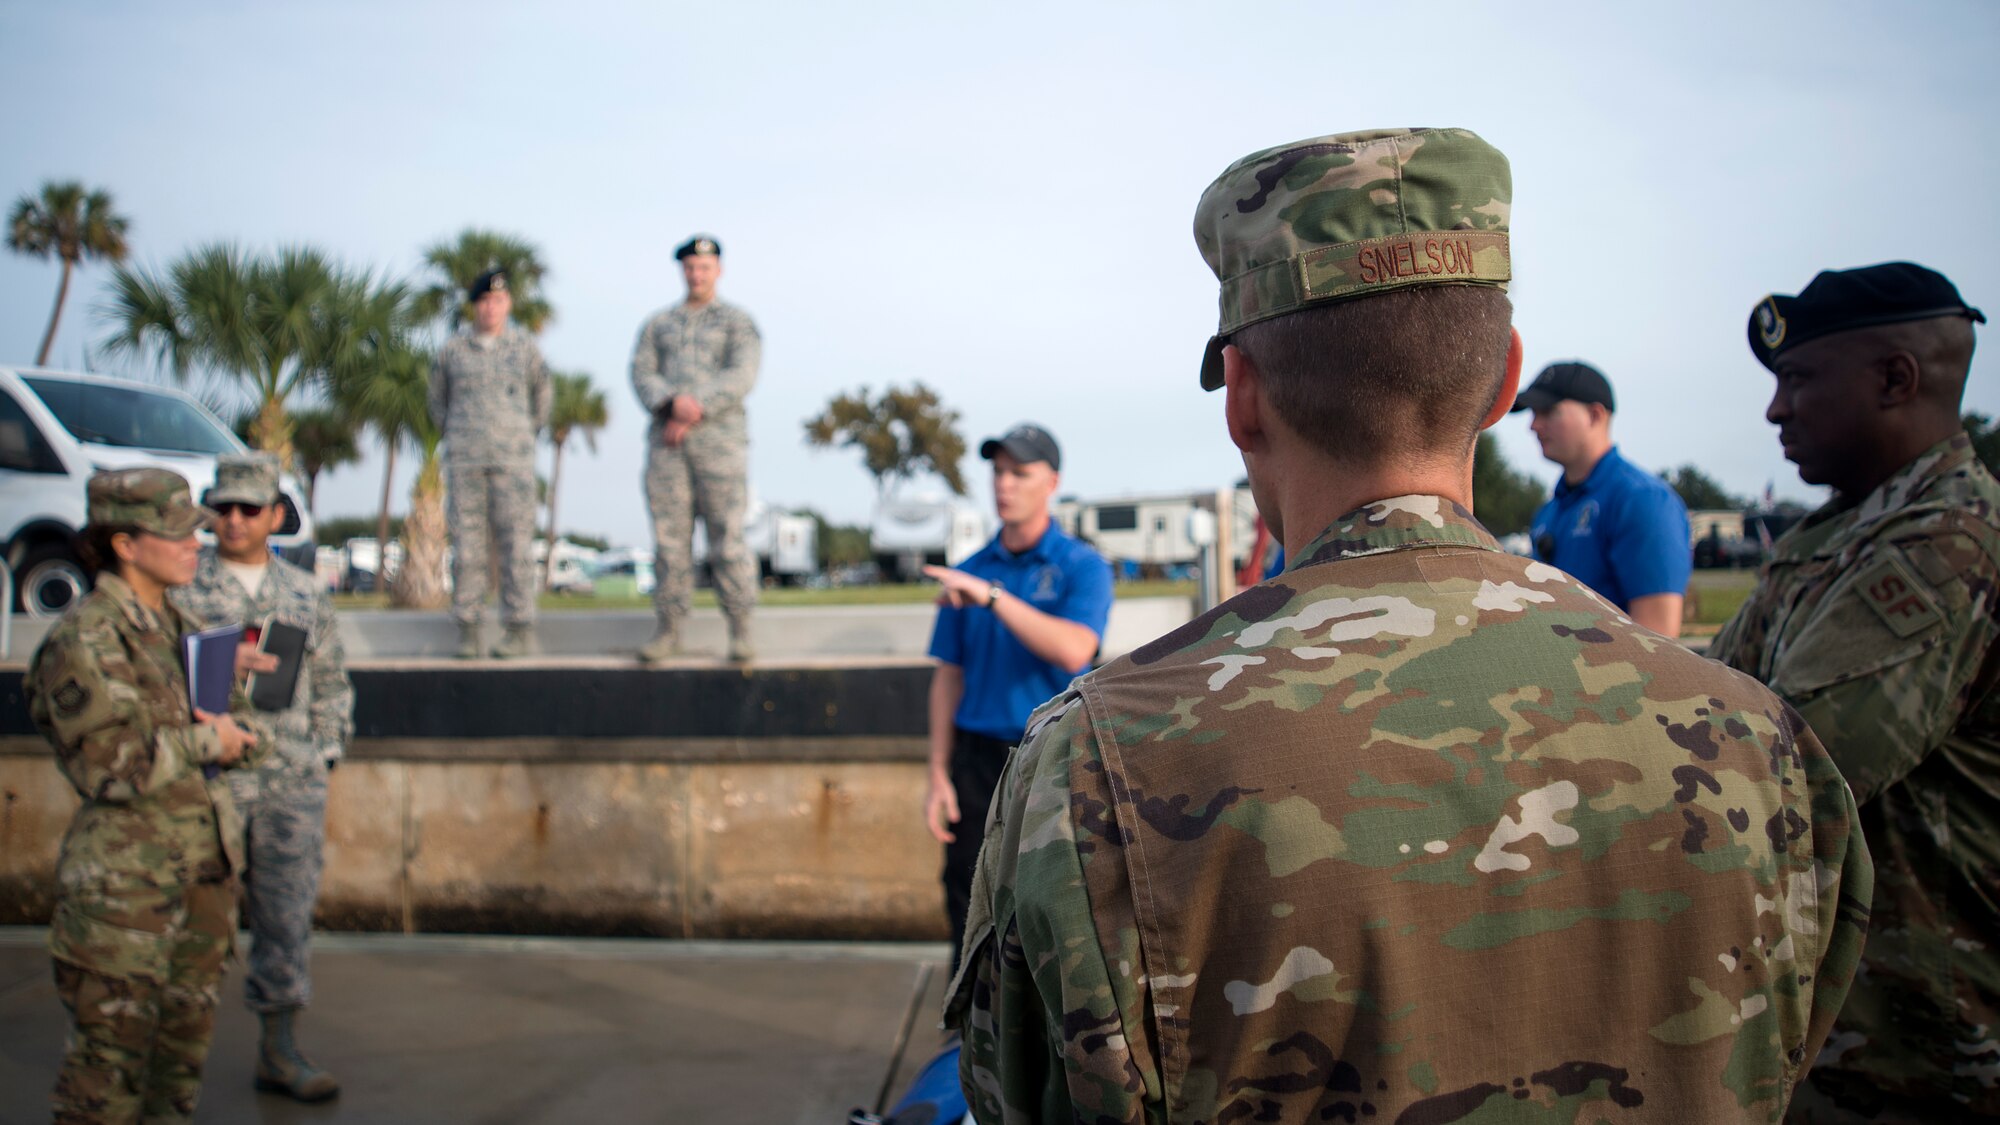 6th Air Mobility Wing leadership, receive a safety briefing from Tech. Sgt. James Himes, 6th SFS Marine Patrol noncommissioned officer in charge at MacDill Air Force Base, Fla., Nov. 26, 2018.